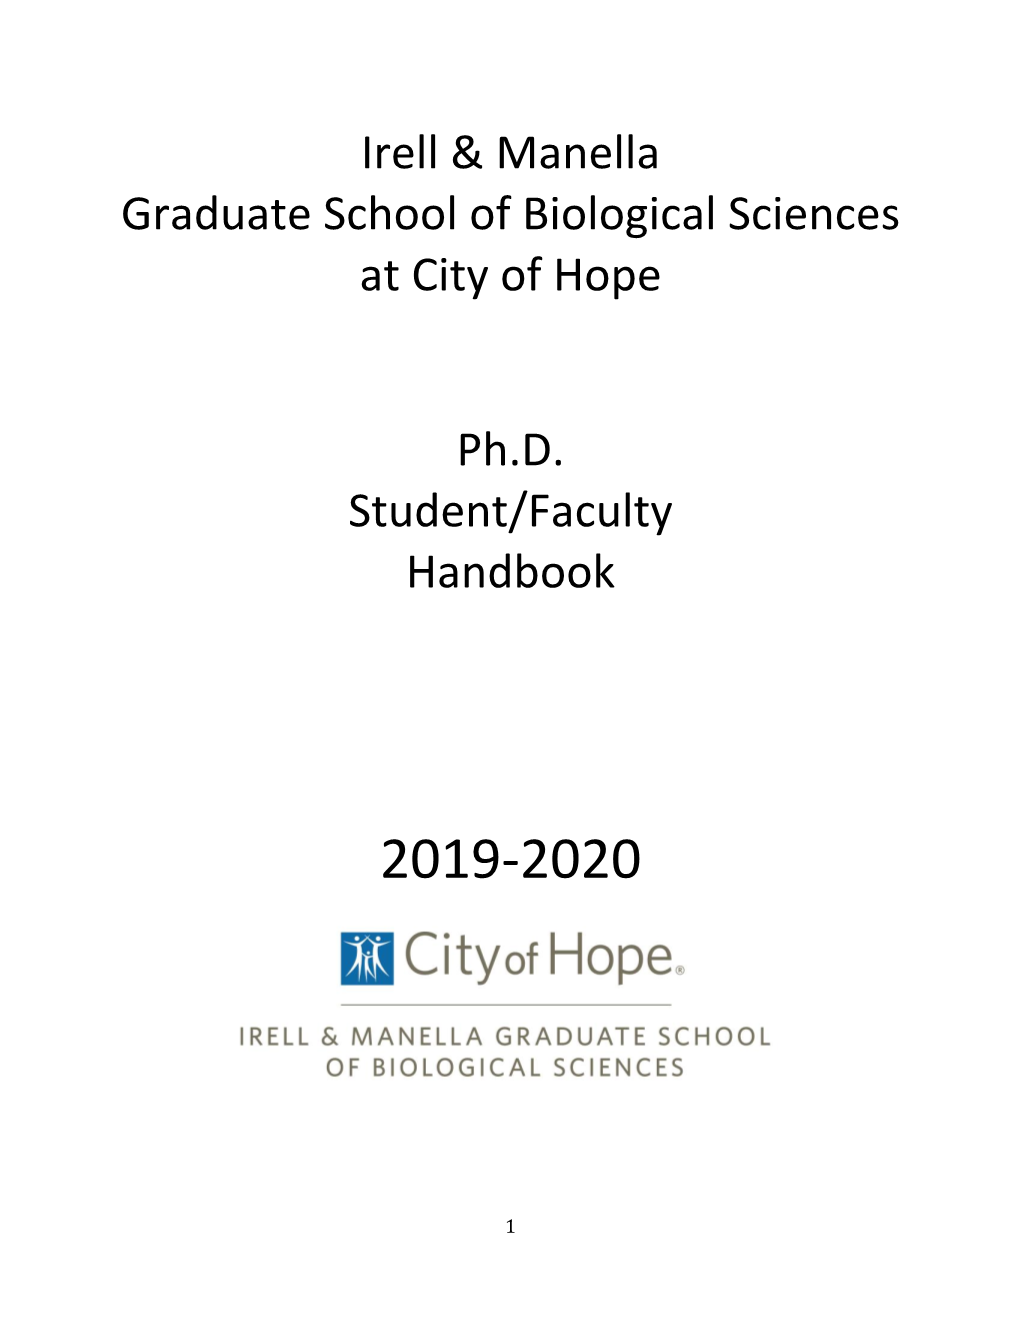 Irell & Manella Graduate School of Biological Sciences at City of Hope